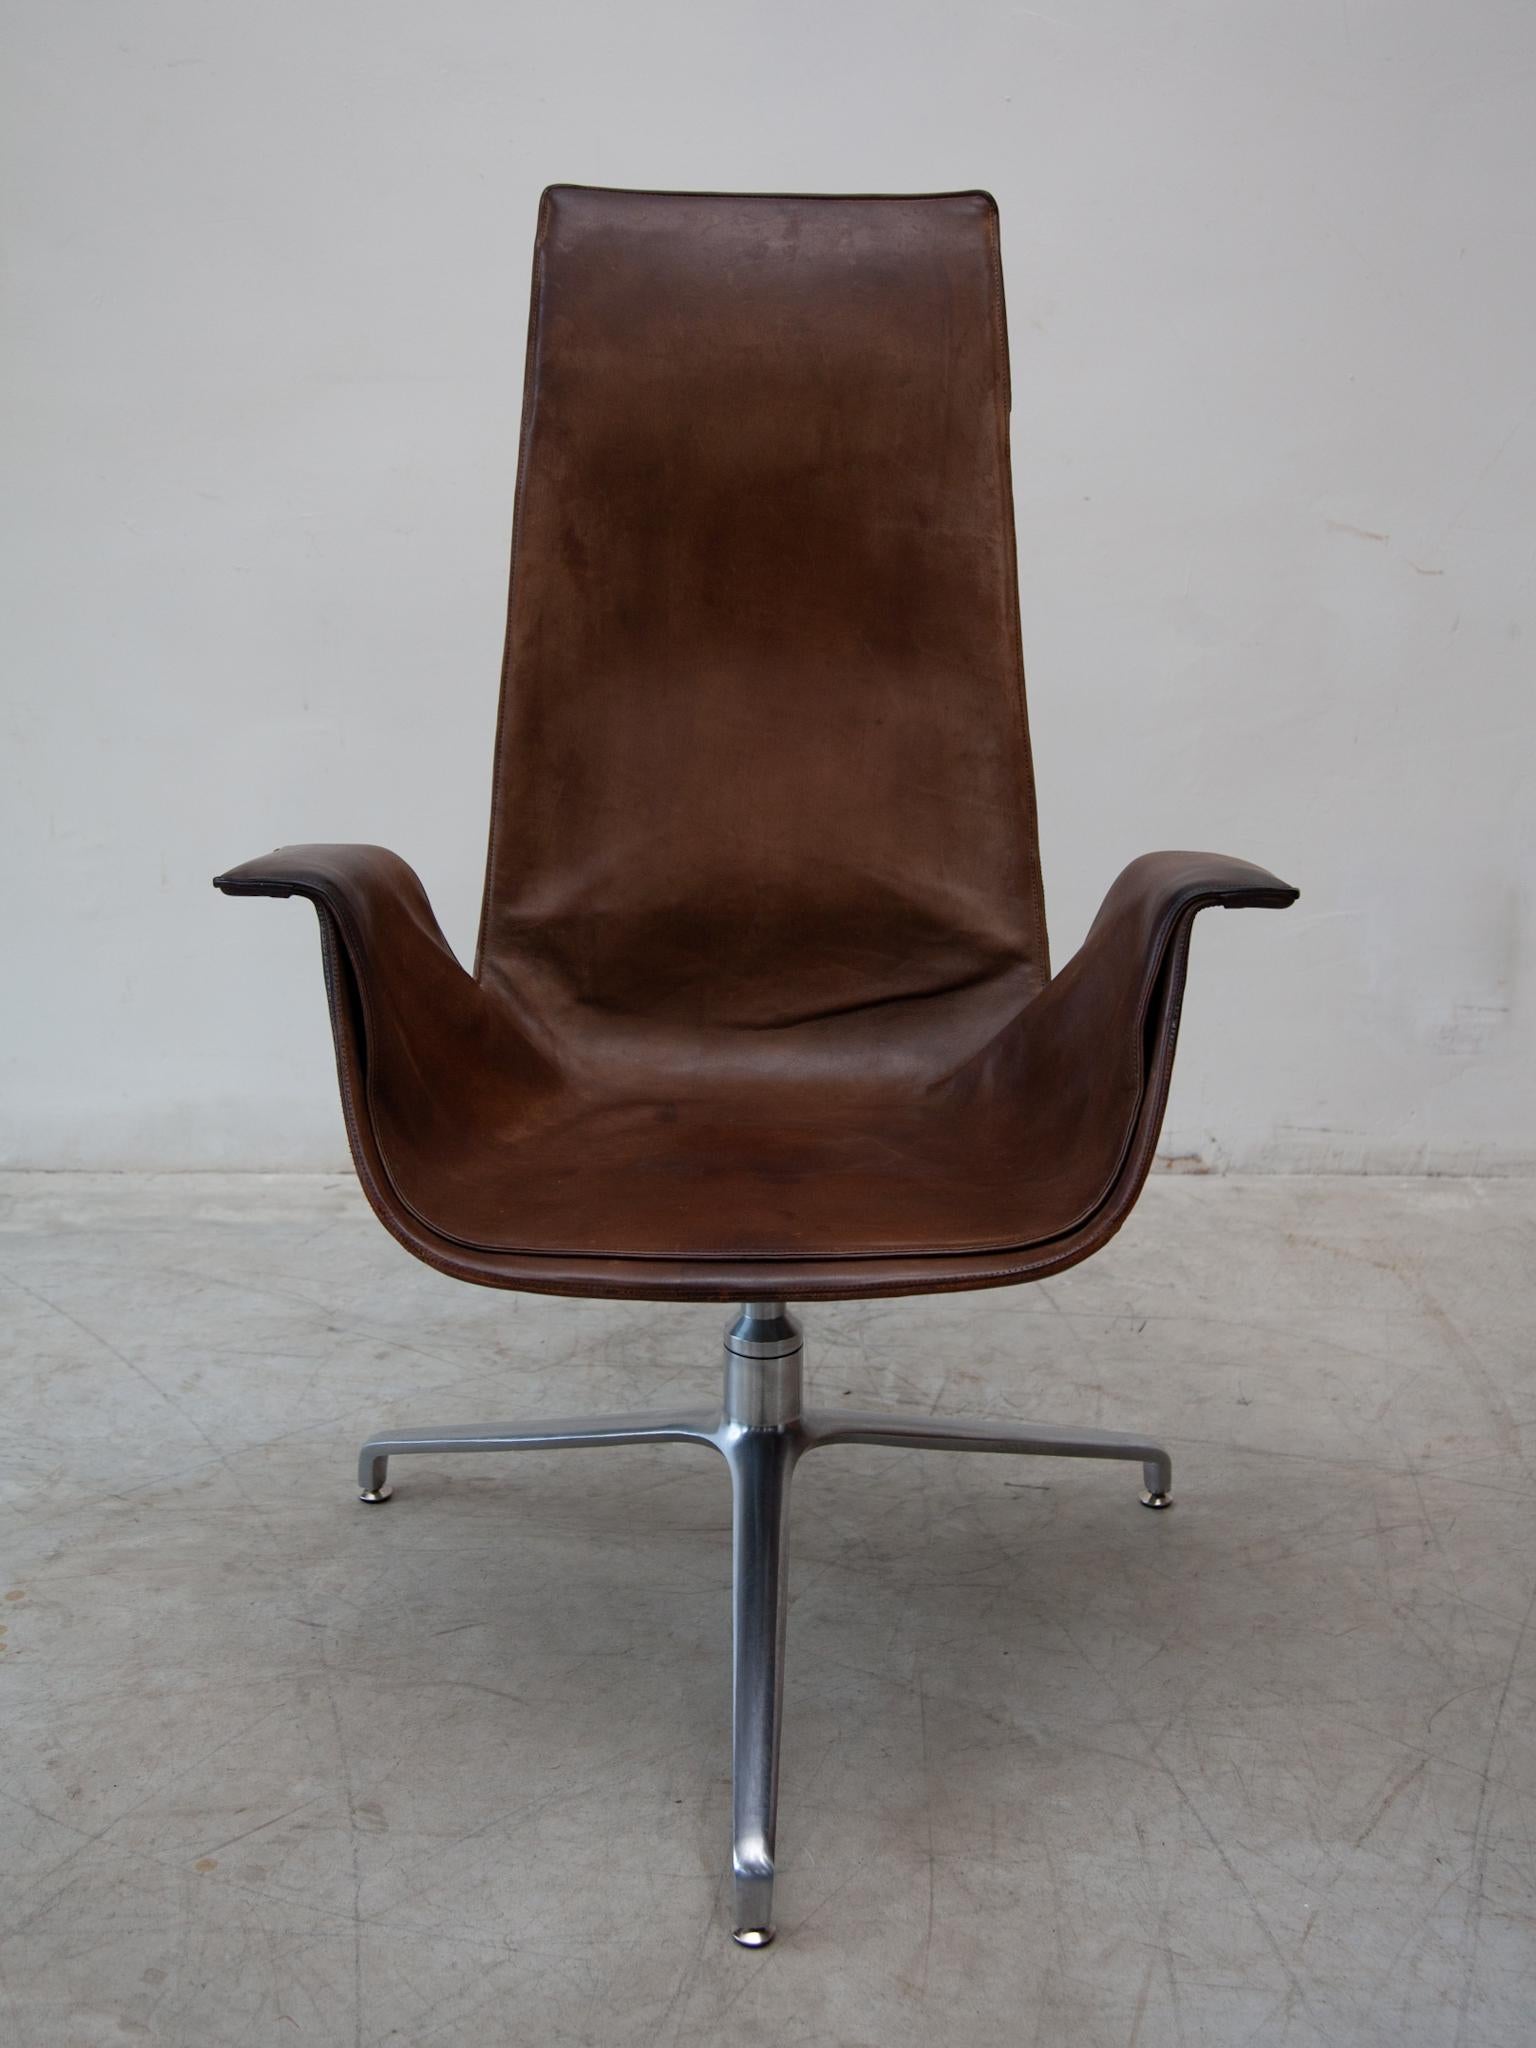 A timeless sculpture of modernity, chocolate brown leather beautiful FK 6725 lounge chair designed in 1964, the model received a federal award for good form. As a meeting lounge chair, designed by Preben Fabricius and Jörgen Kastholm, the models